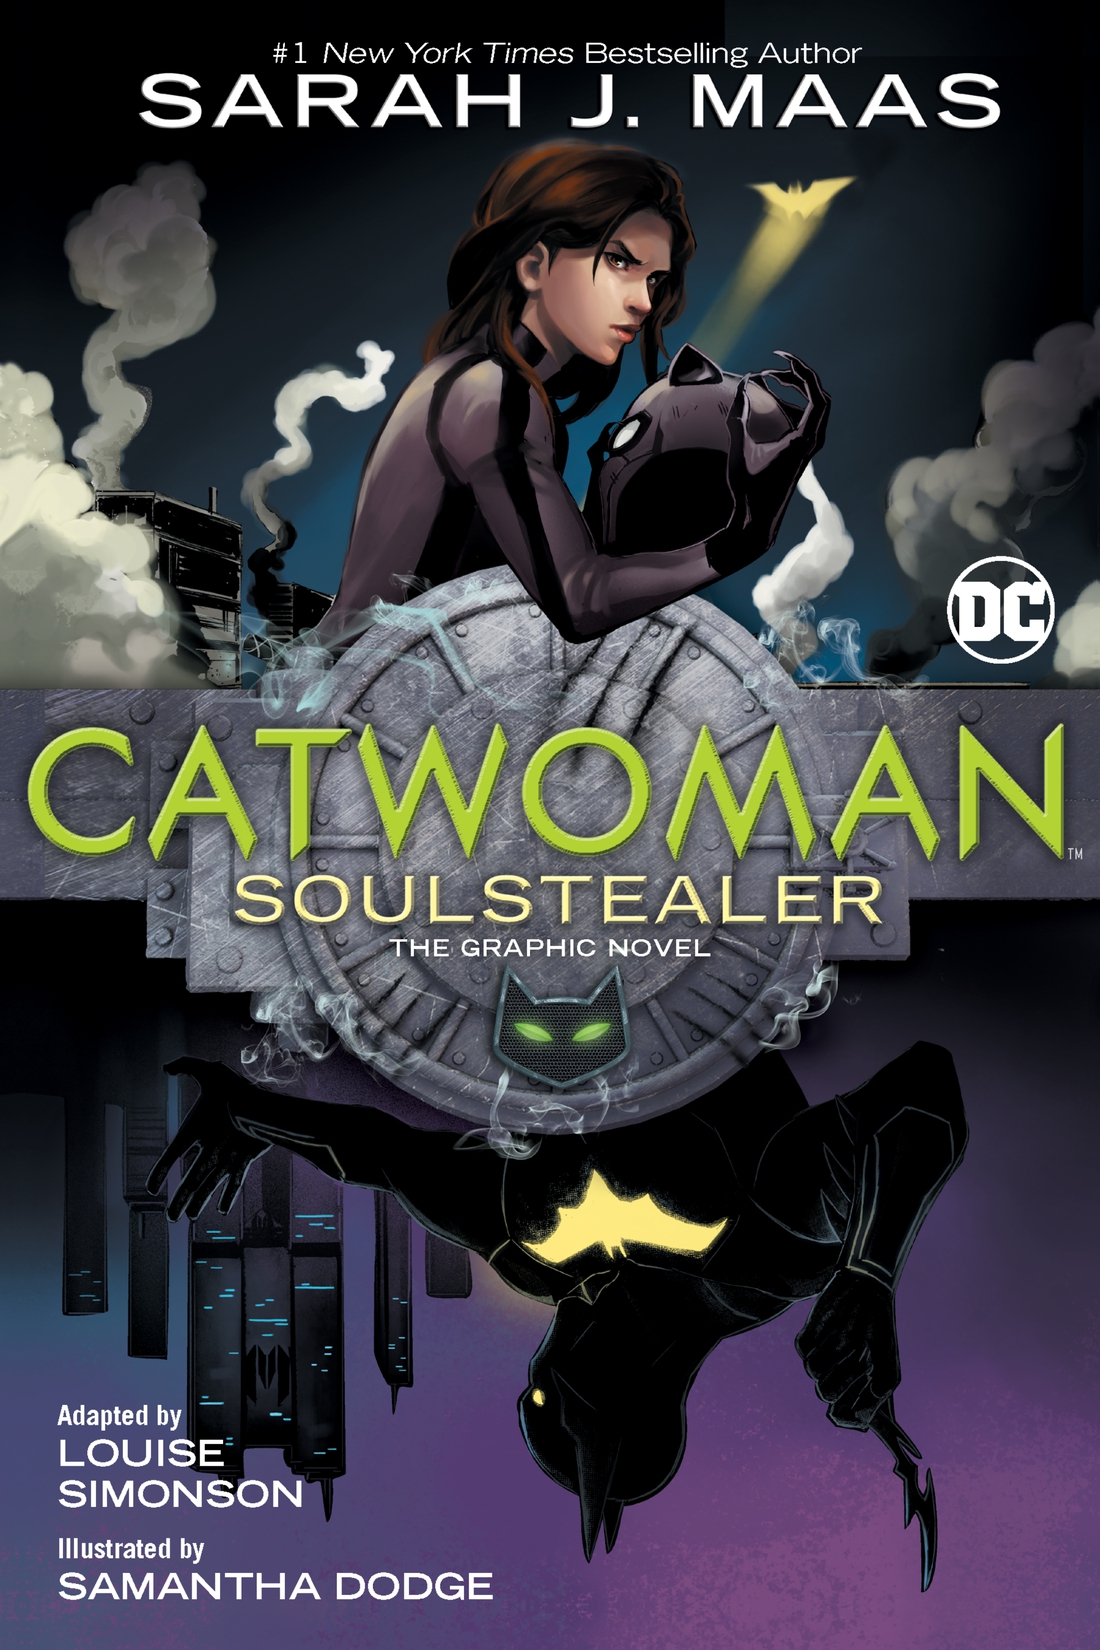 Catwoman: Soulstealer (The Graphic Novel) preview images